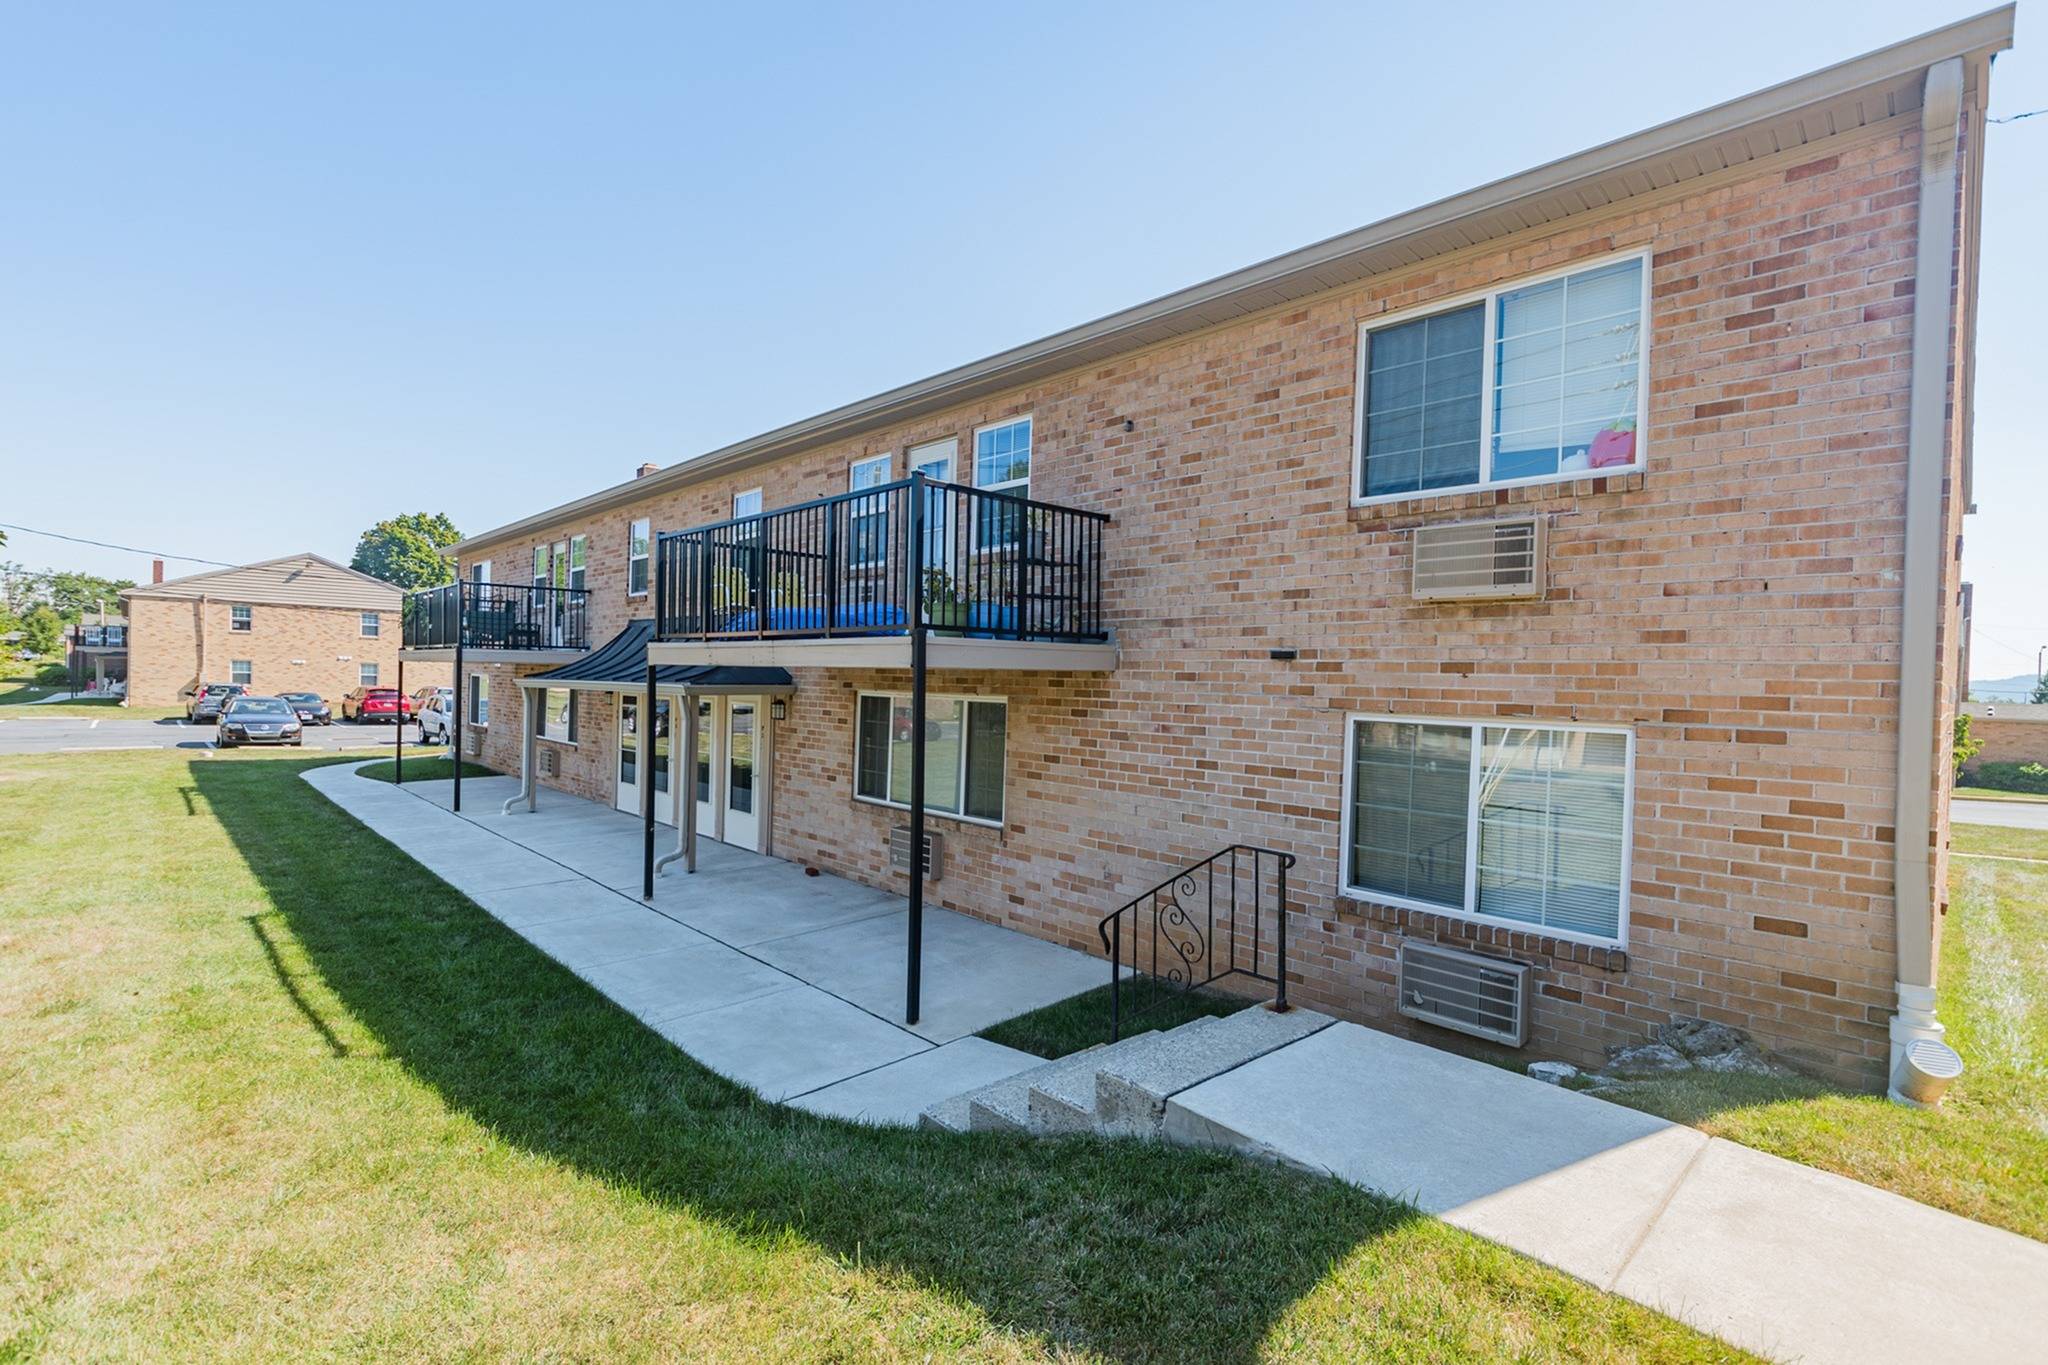 Woodland Plaza Apartments exterior with balconies and a pathway leading to apartment entrance